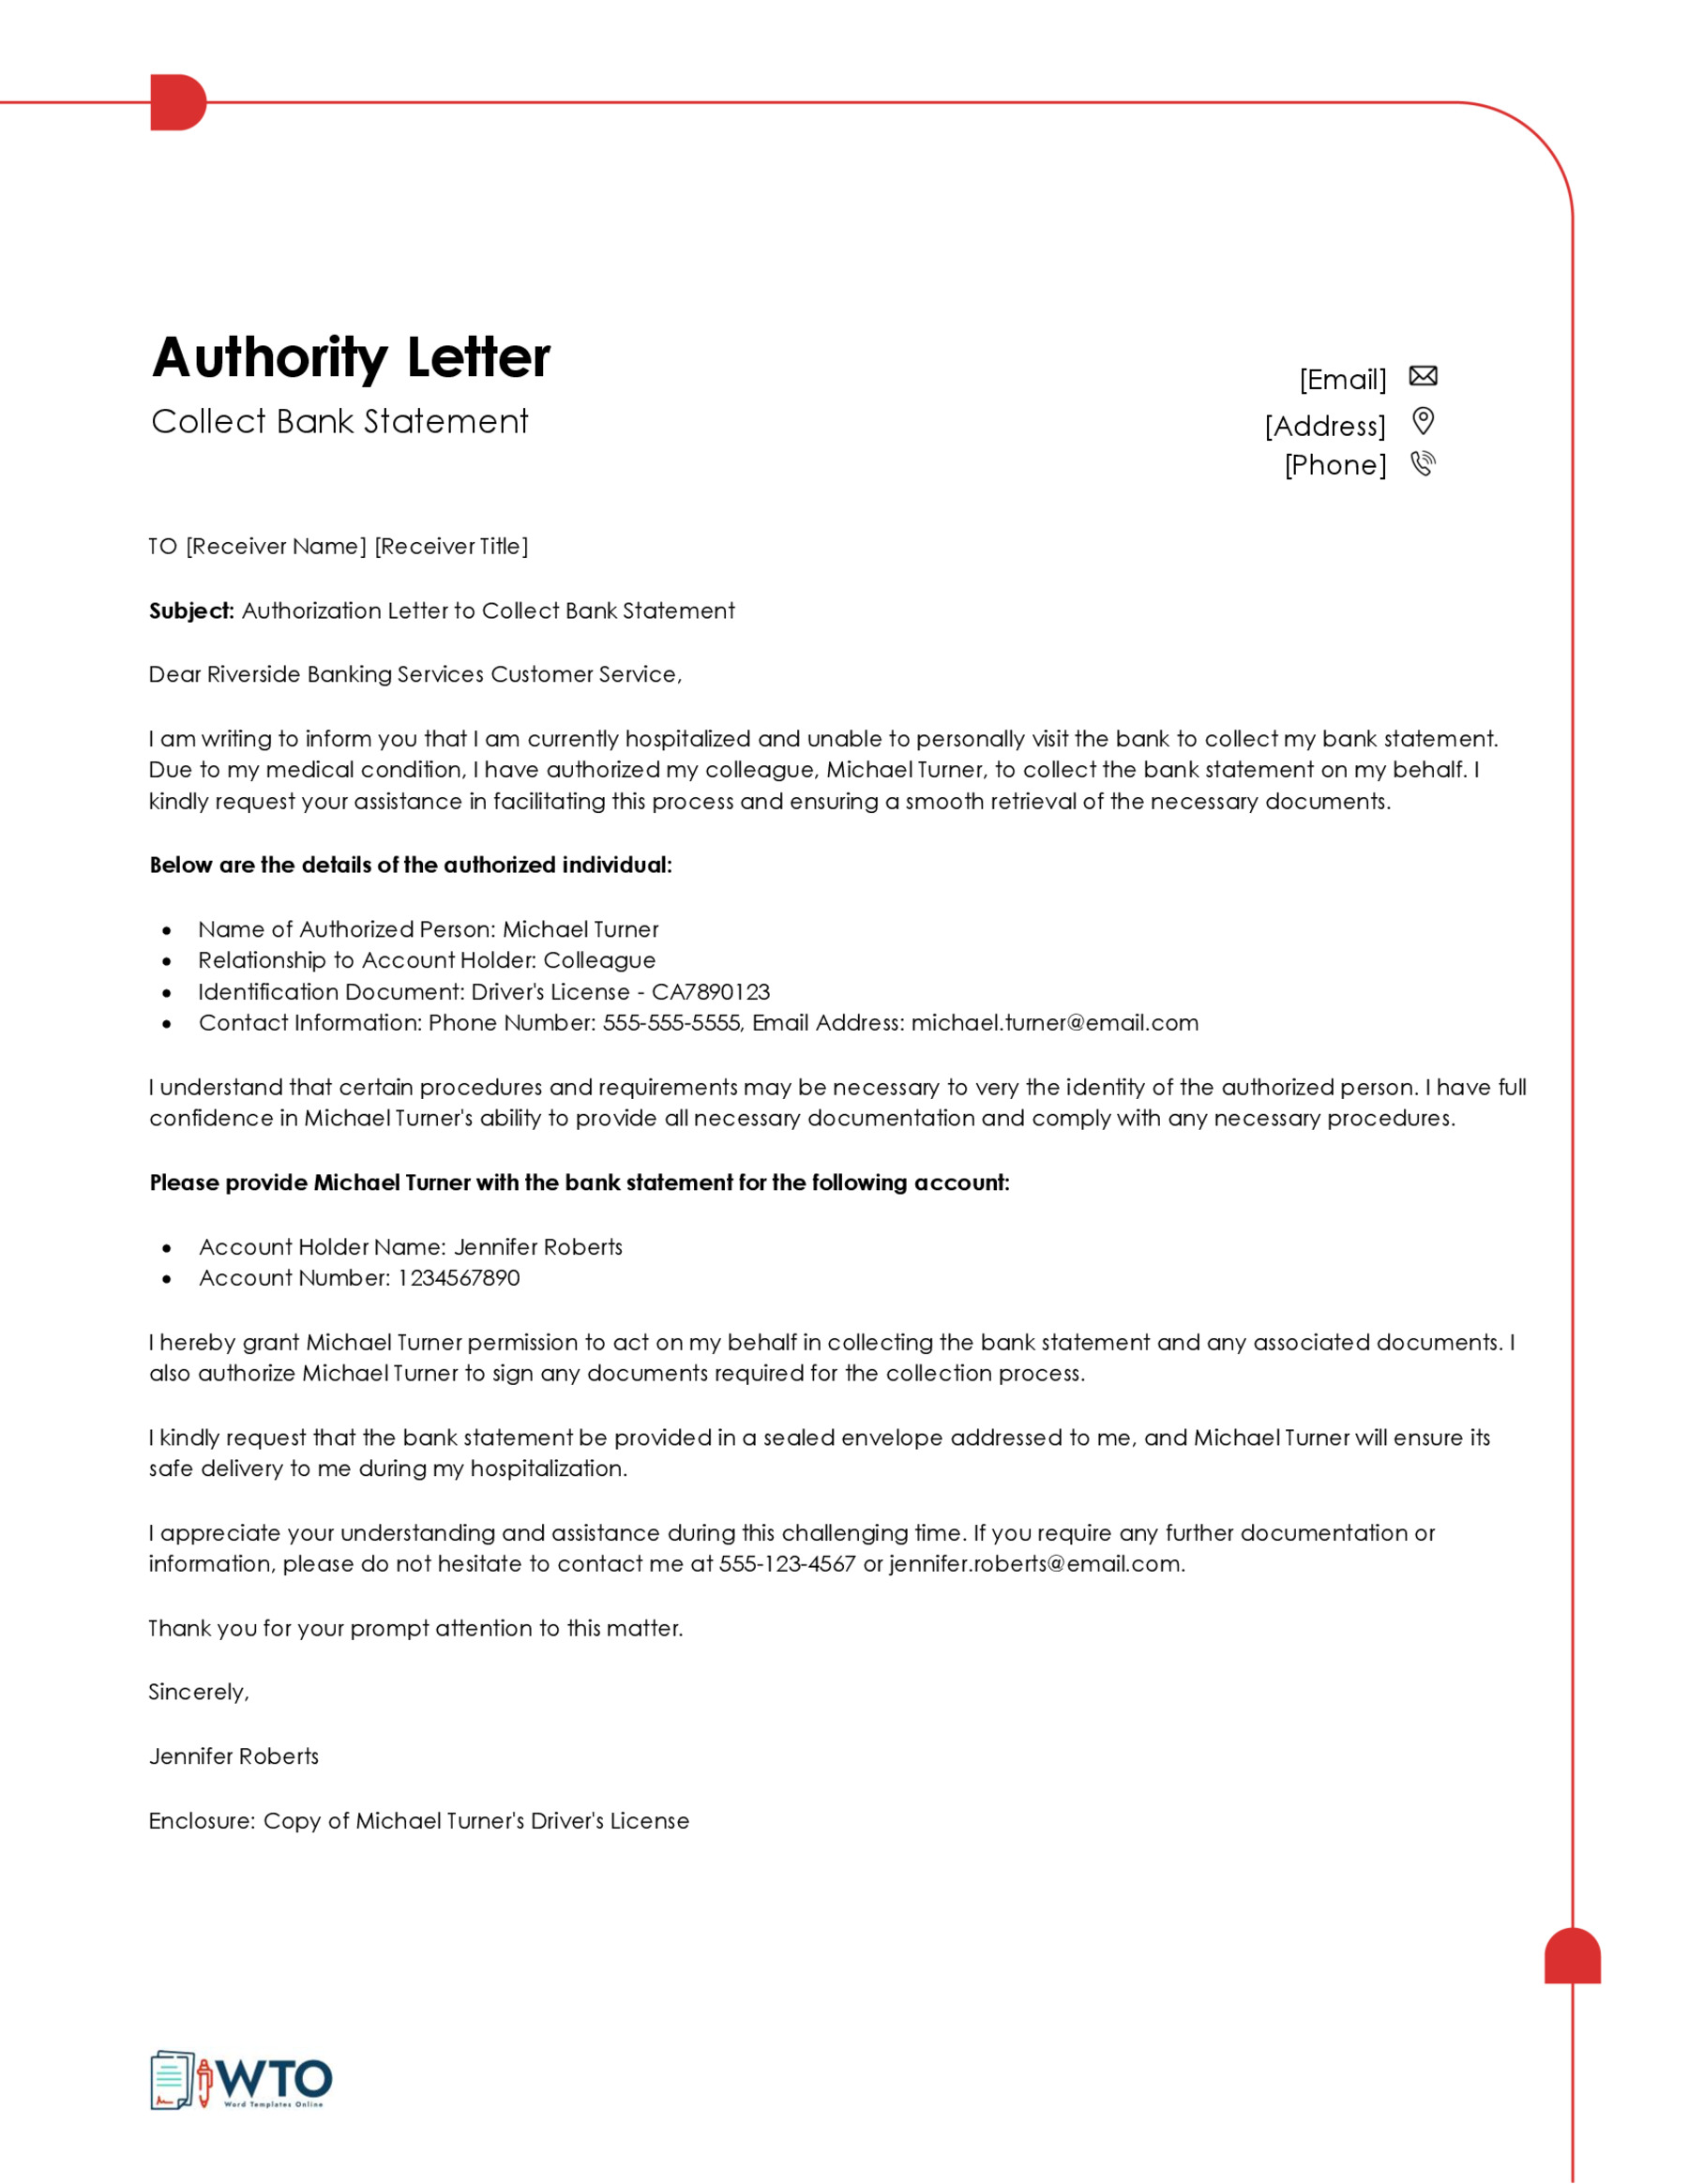 Sample Bank Statement Authorization Letter-Word Format